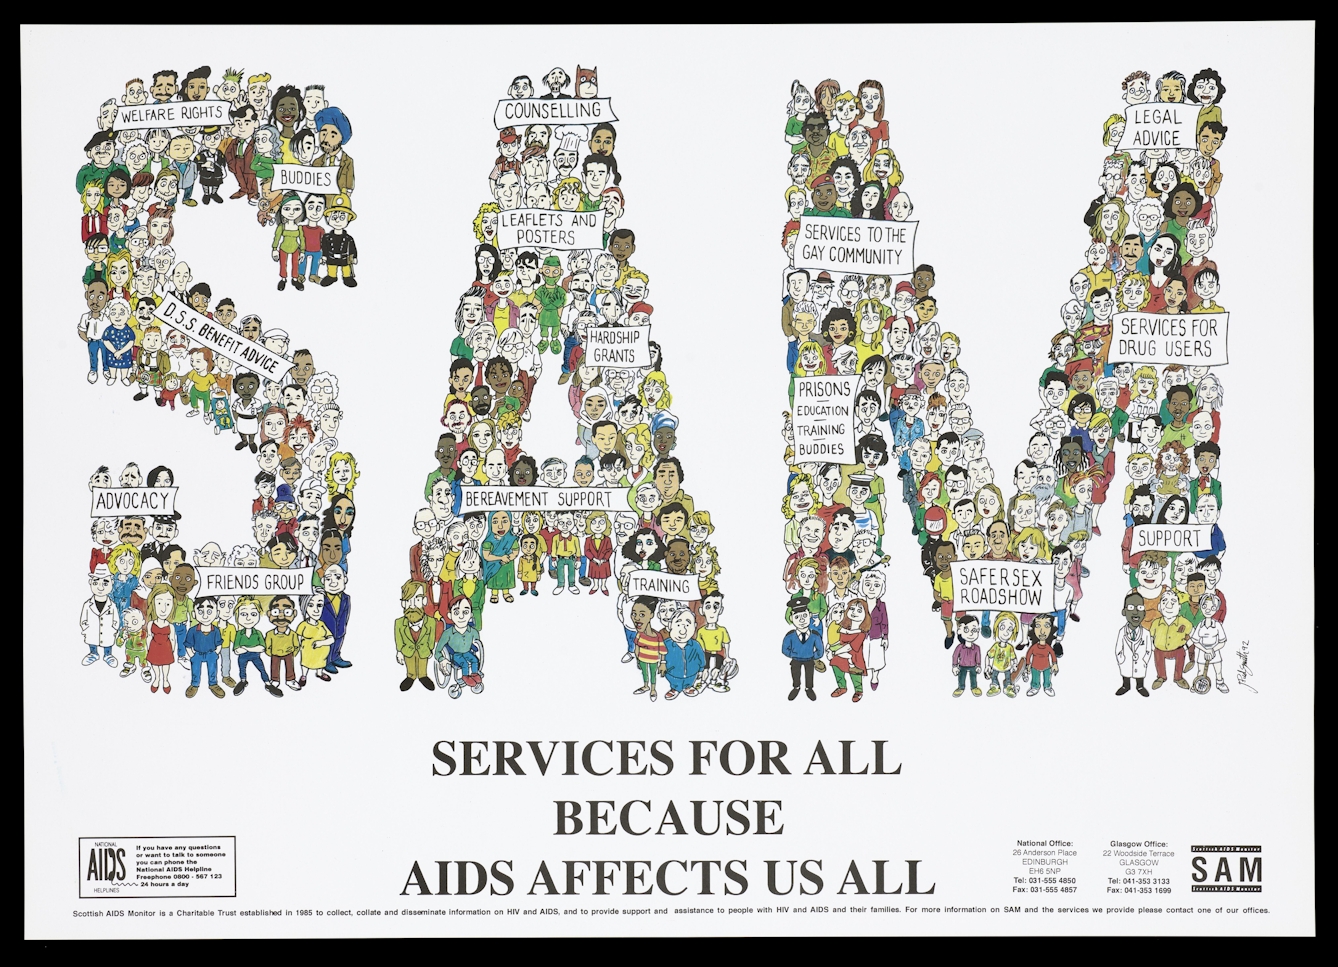 Numerous figures form the word 'SAM'. They carry banners with text such as "welfare rights", "services to the gay community", "services for drug users", "safer sex roadshow" and "bereavement support". The large title text underneath reads "Services for all because AIDS affects us all. 